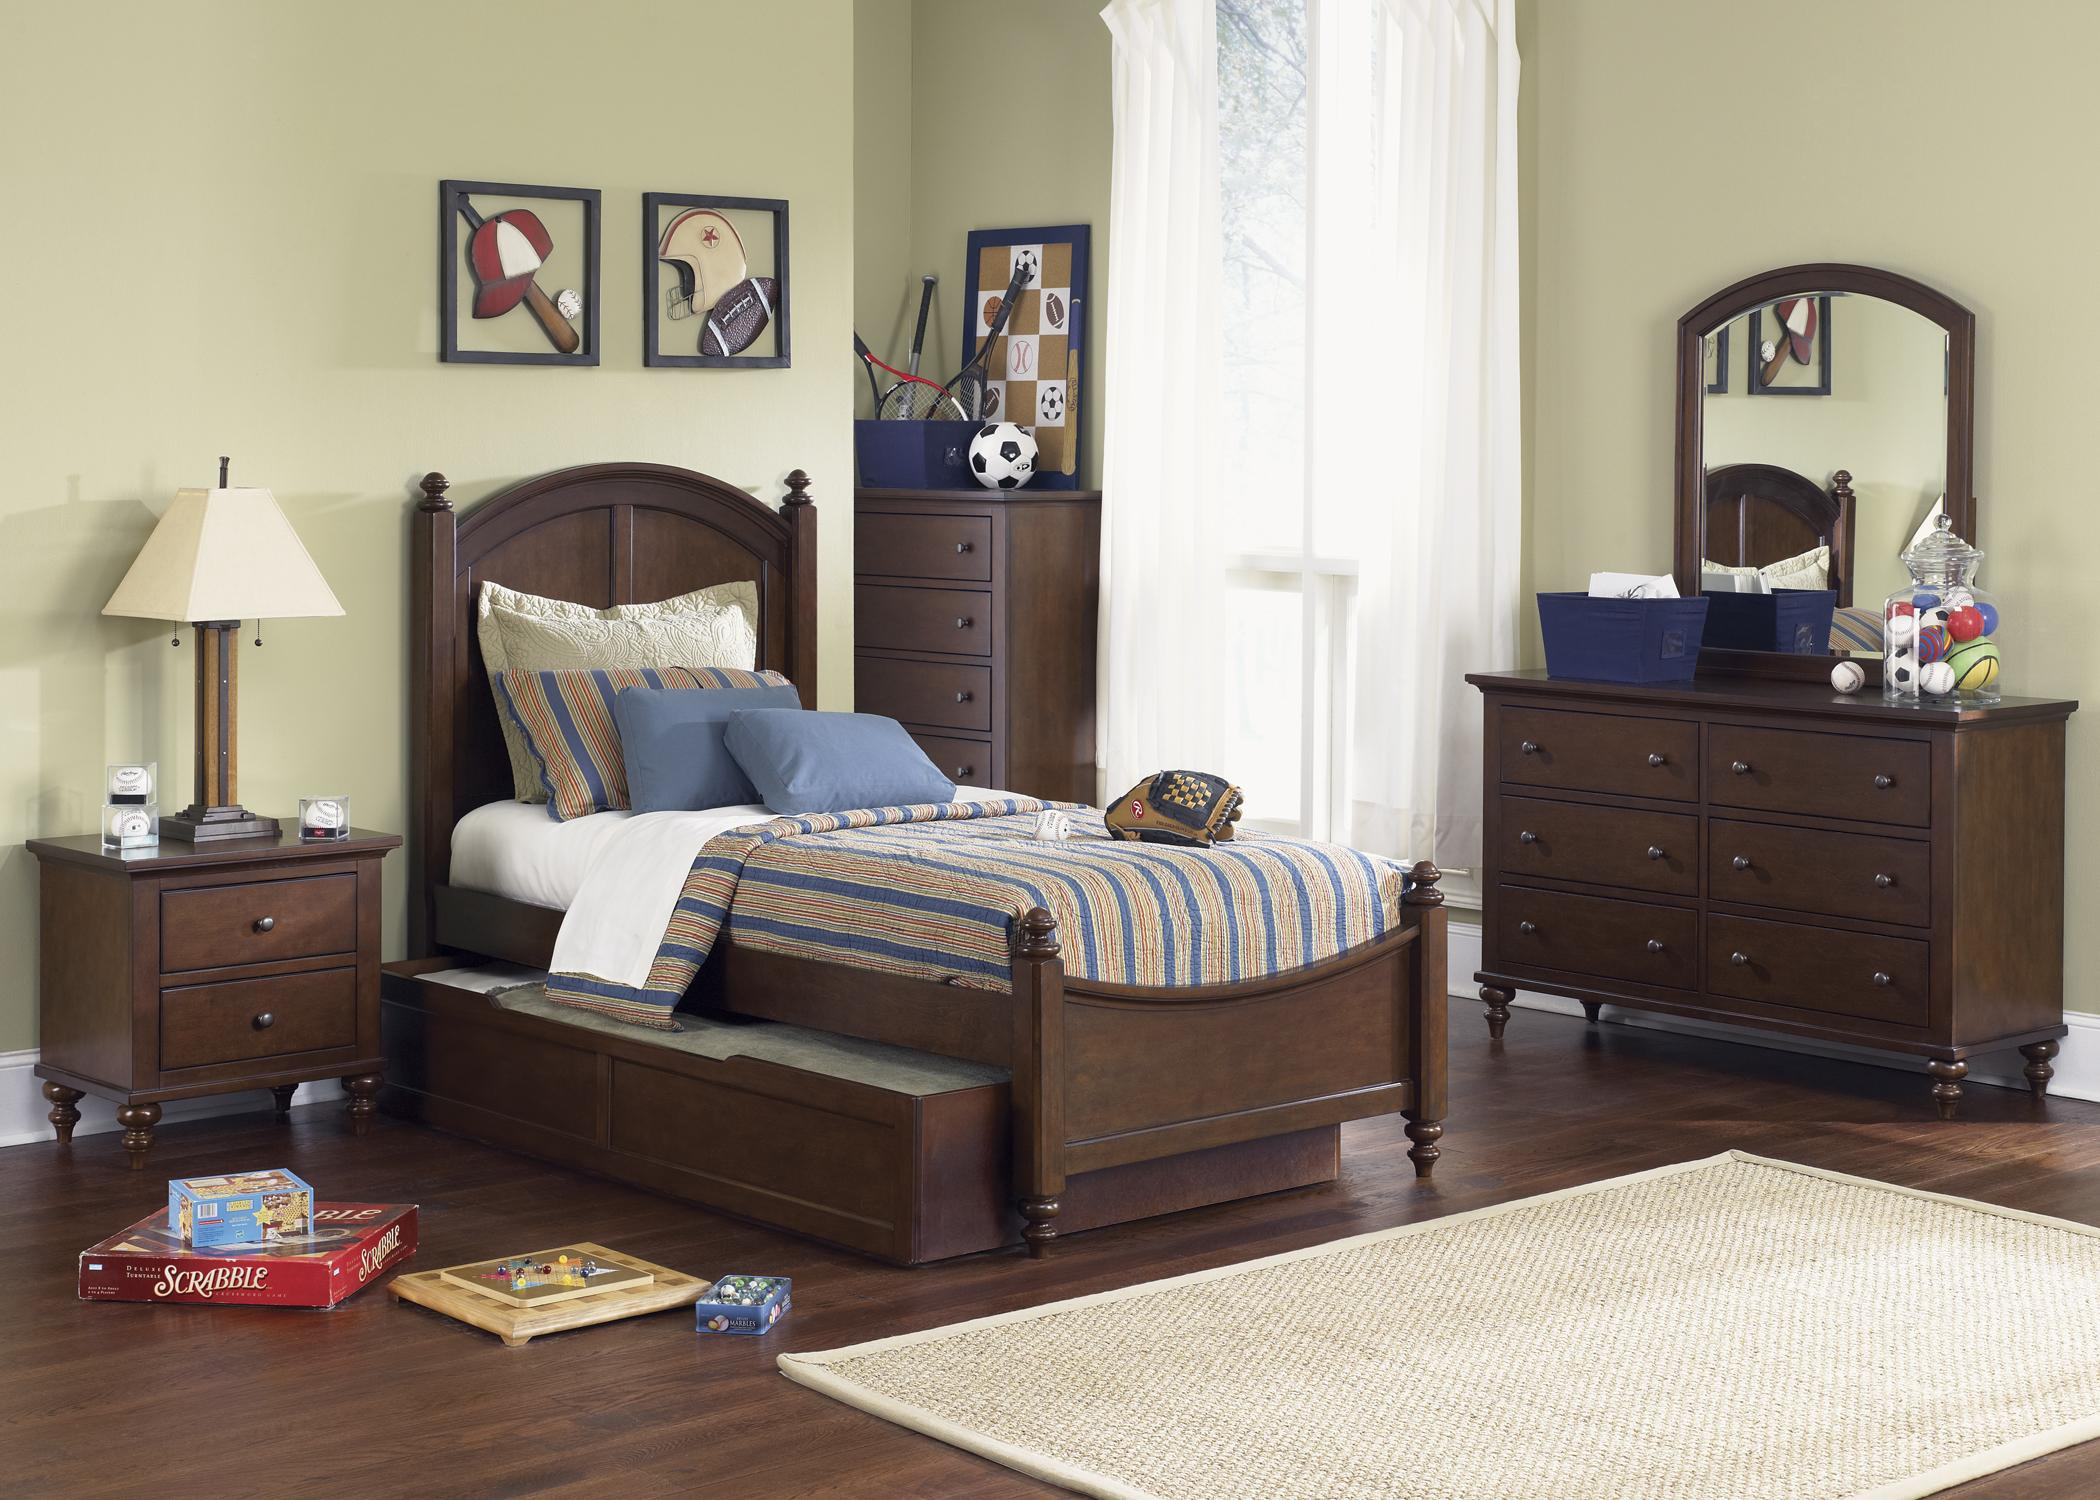 Abbott Ridge Youth Bedroom 277 Liberty Furniture Coconis with regard to dimensions 2100 X 1500